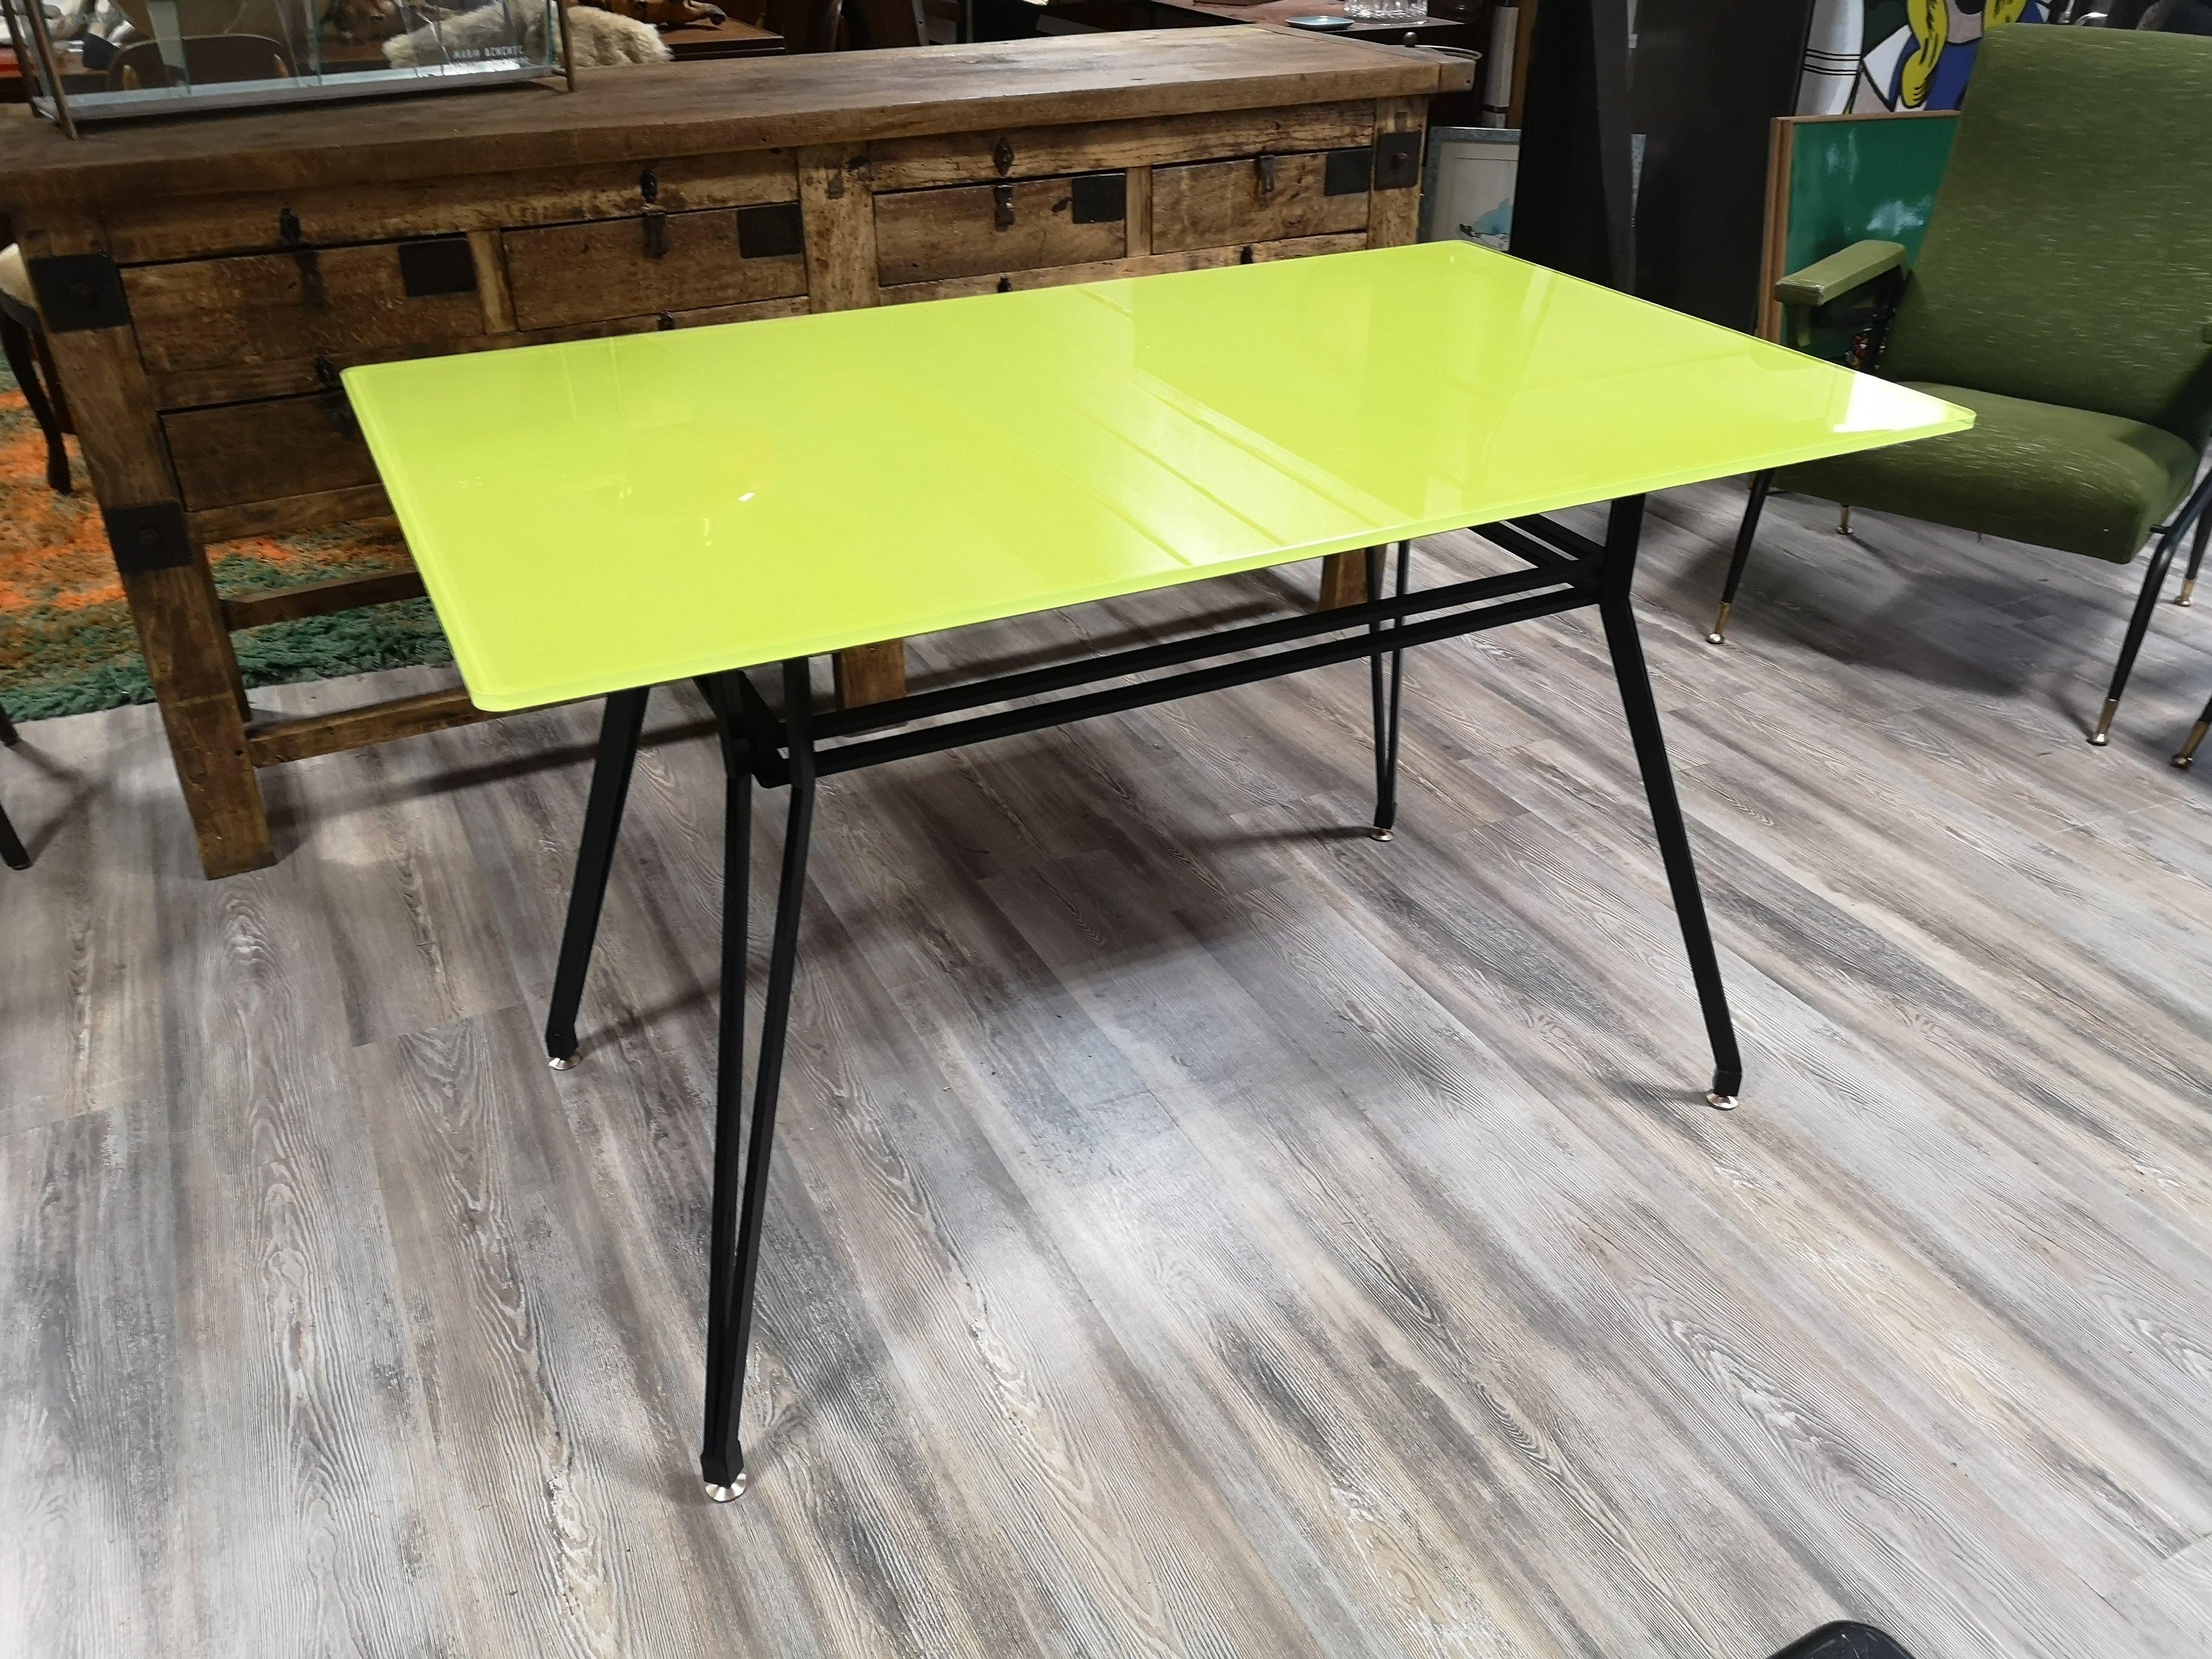 1950s dining table with iron frame and yellow/green glass top.
Adjustable brass feet.
Small size 125 x 75 cm. so it can also be placed in smaller living areas.
The stained glass top makes it perfect for young and lively environments.
It is also